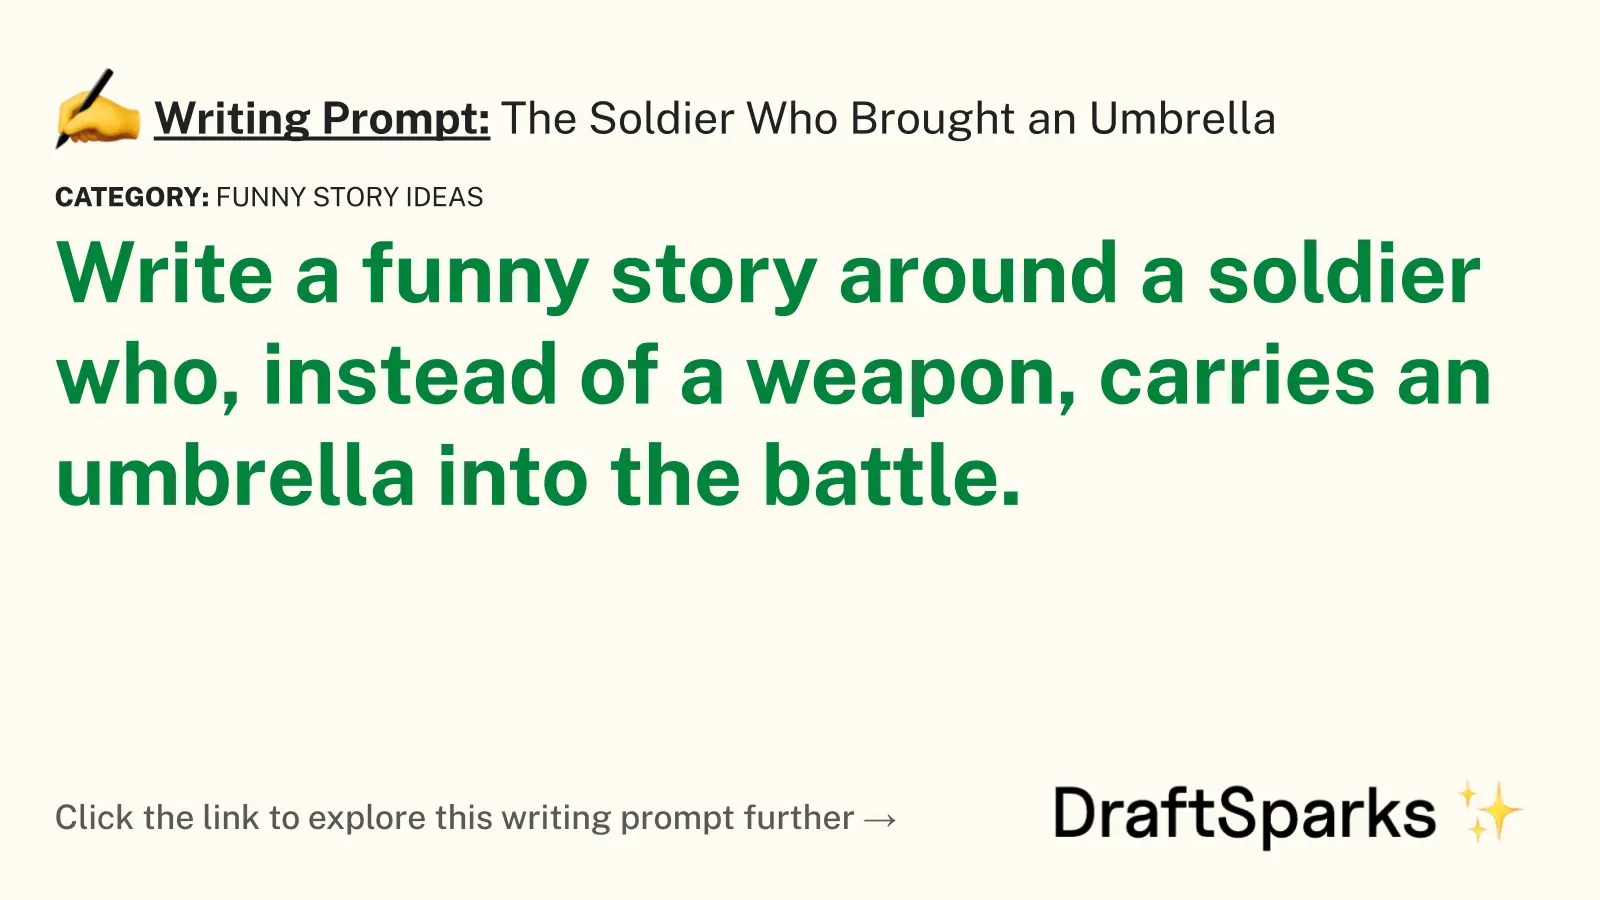 The Soldier Who Brought an Umbrella